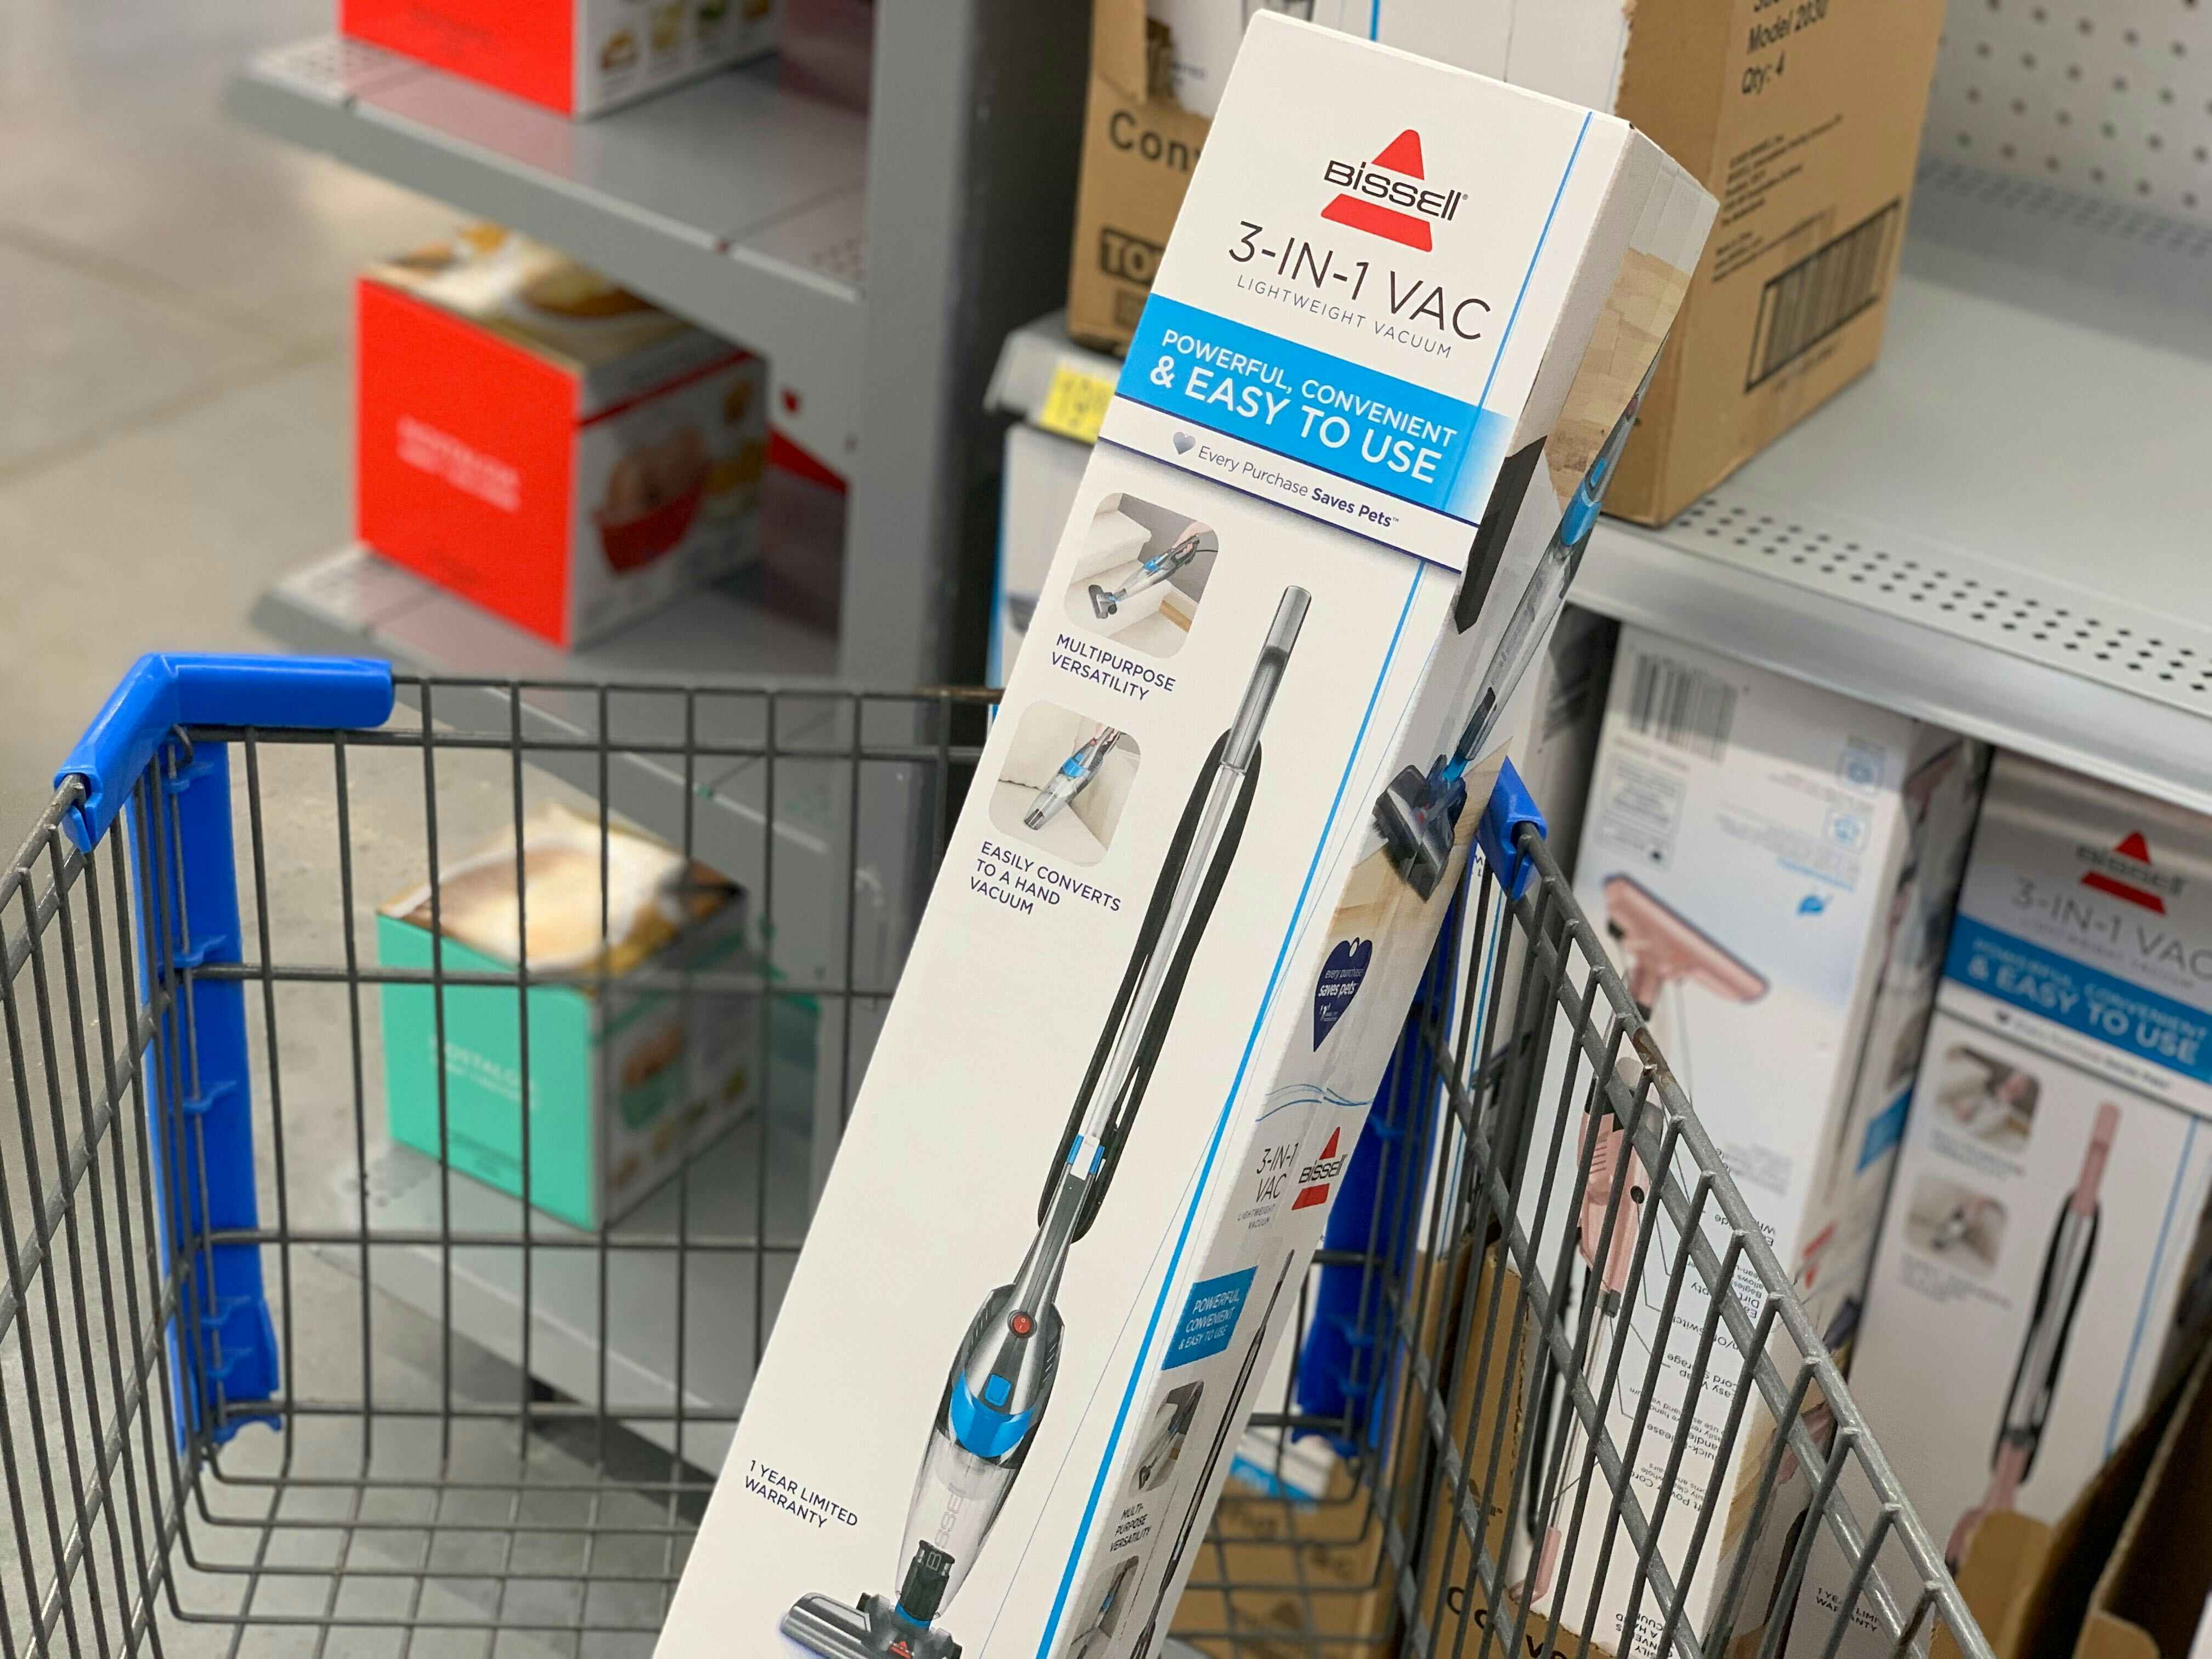 A Bissell 3-in-1 Vacuum in a Walmart shopping cart.